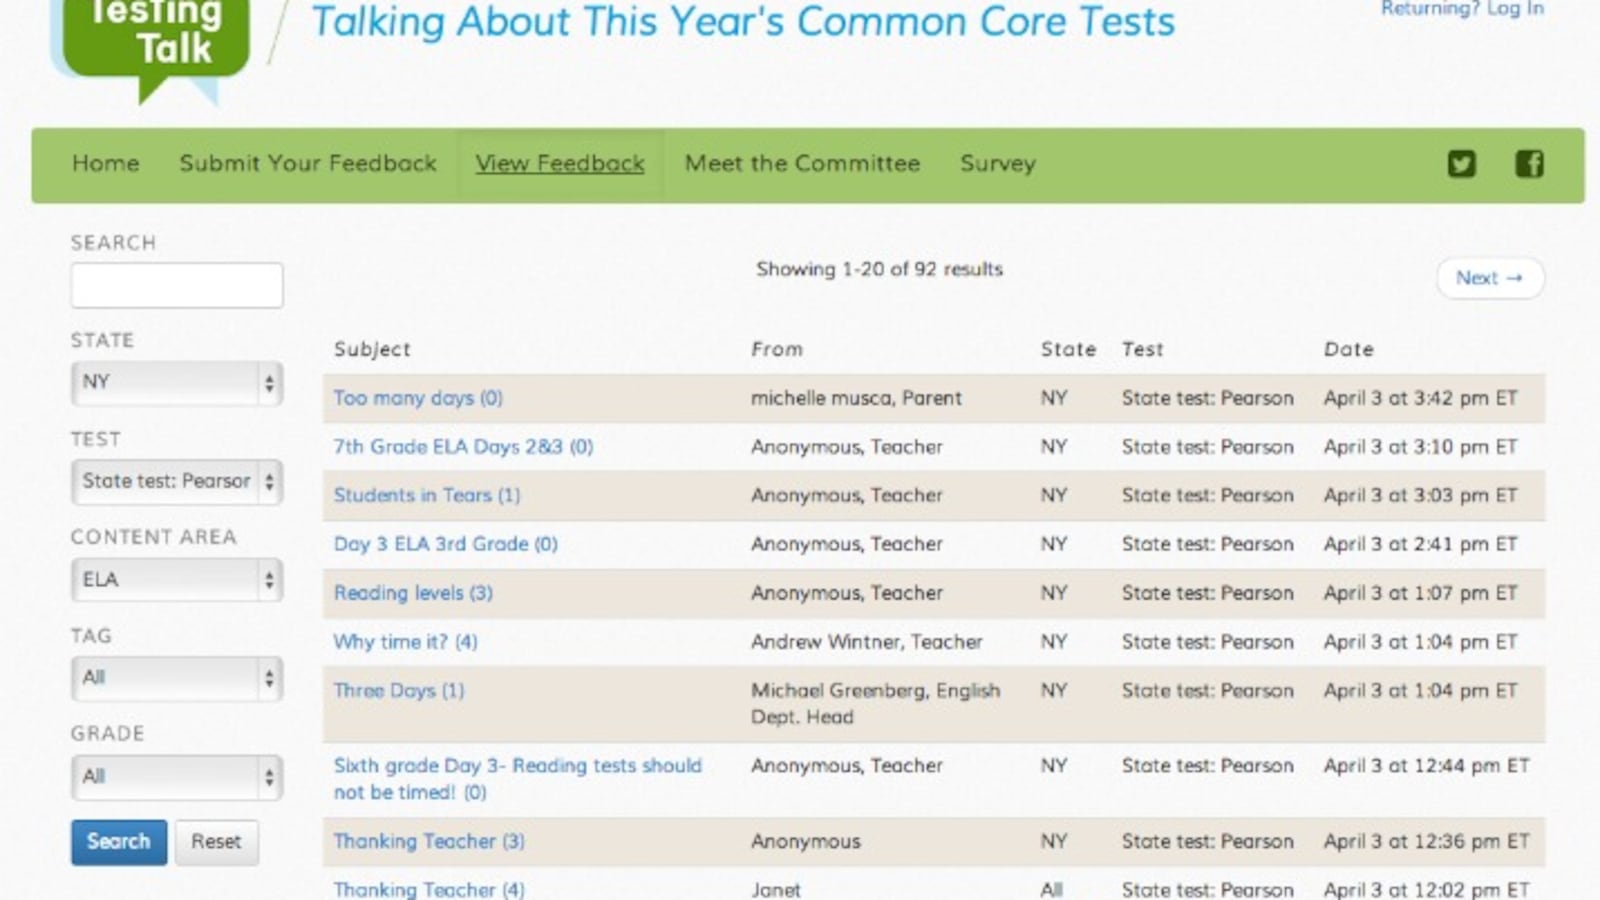 A new website asks teachers to share their thoughts about Common Core tests.